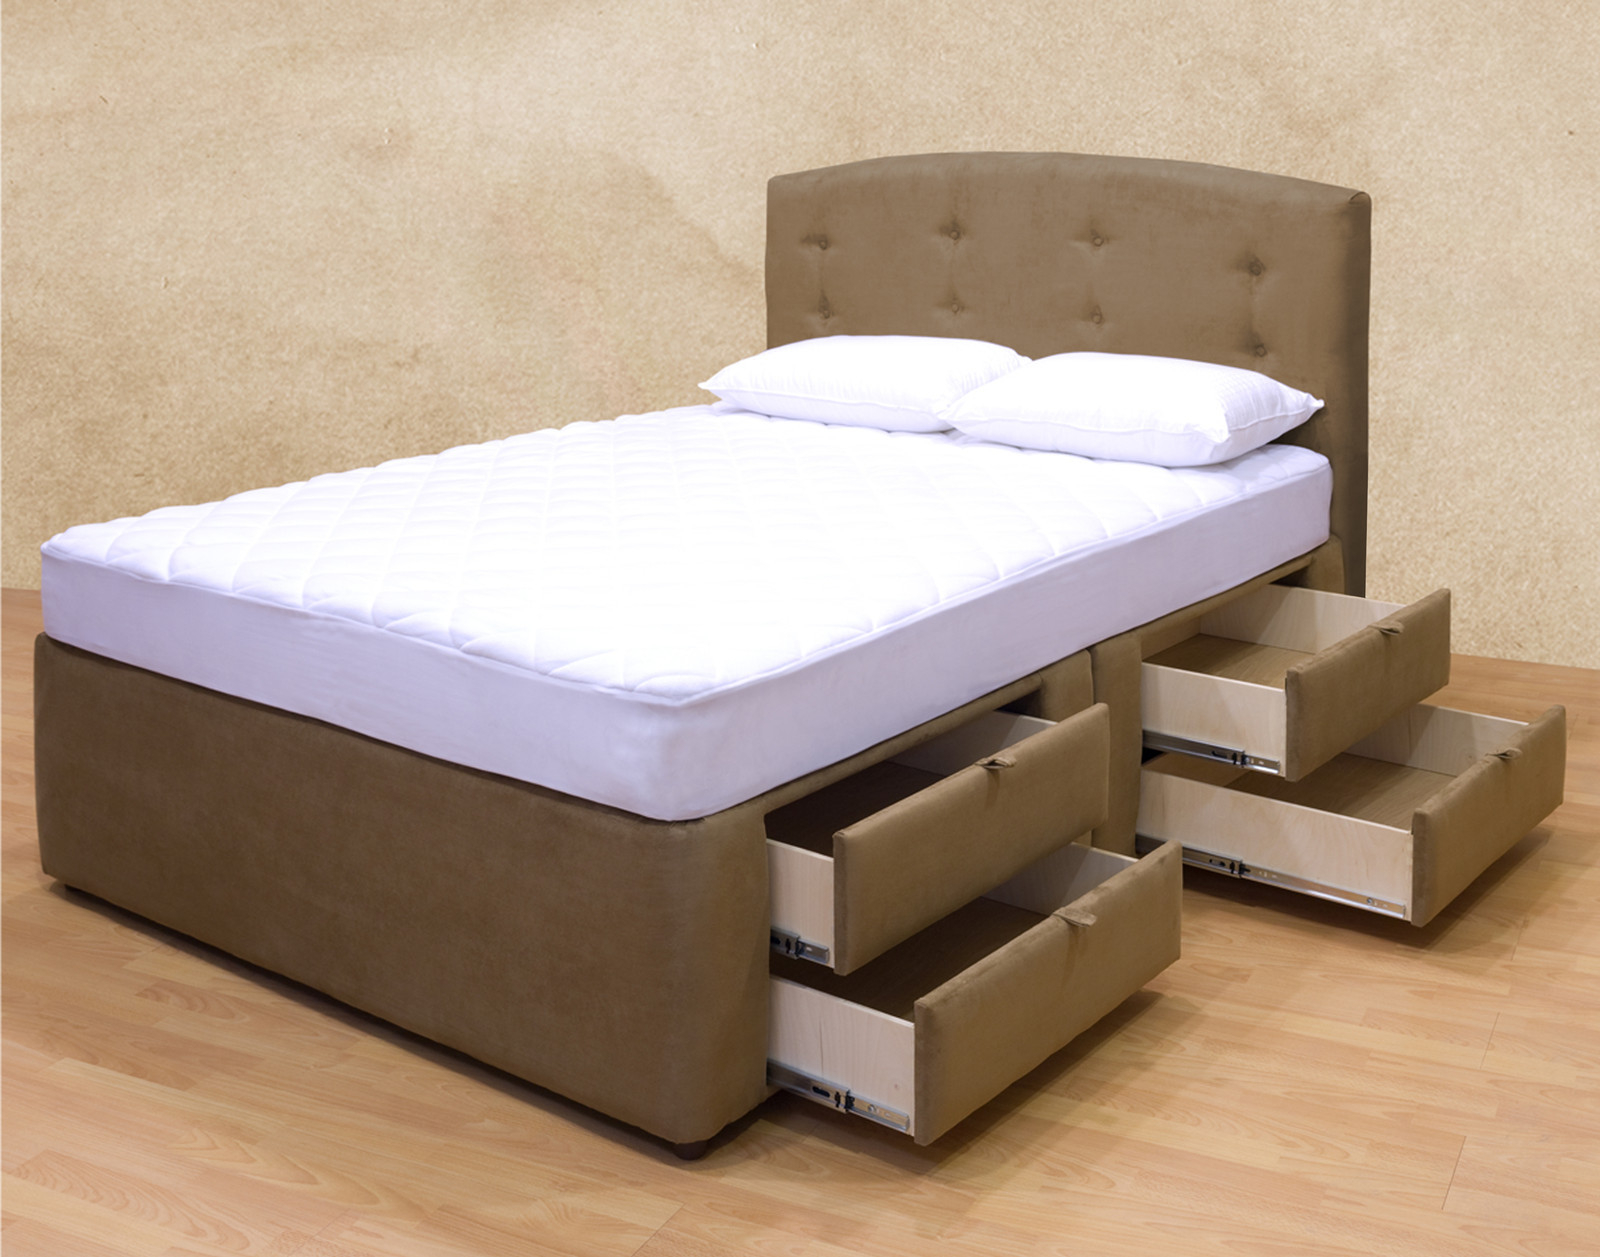 Bed With Drawers Underneath Visualhunt, King Size Bed Frame With Storage Drawers Underneath